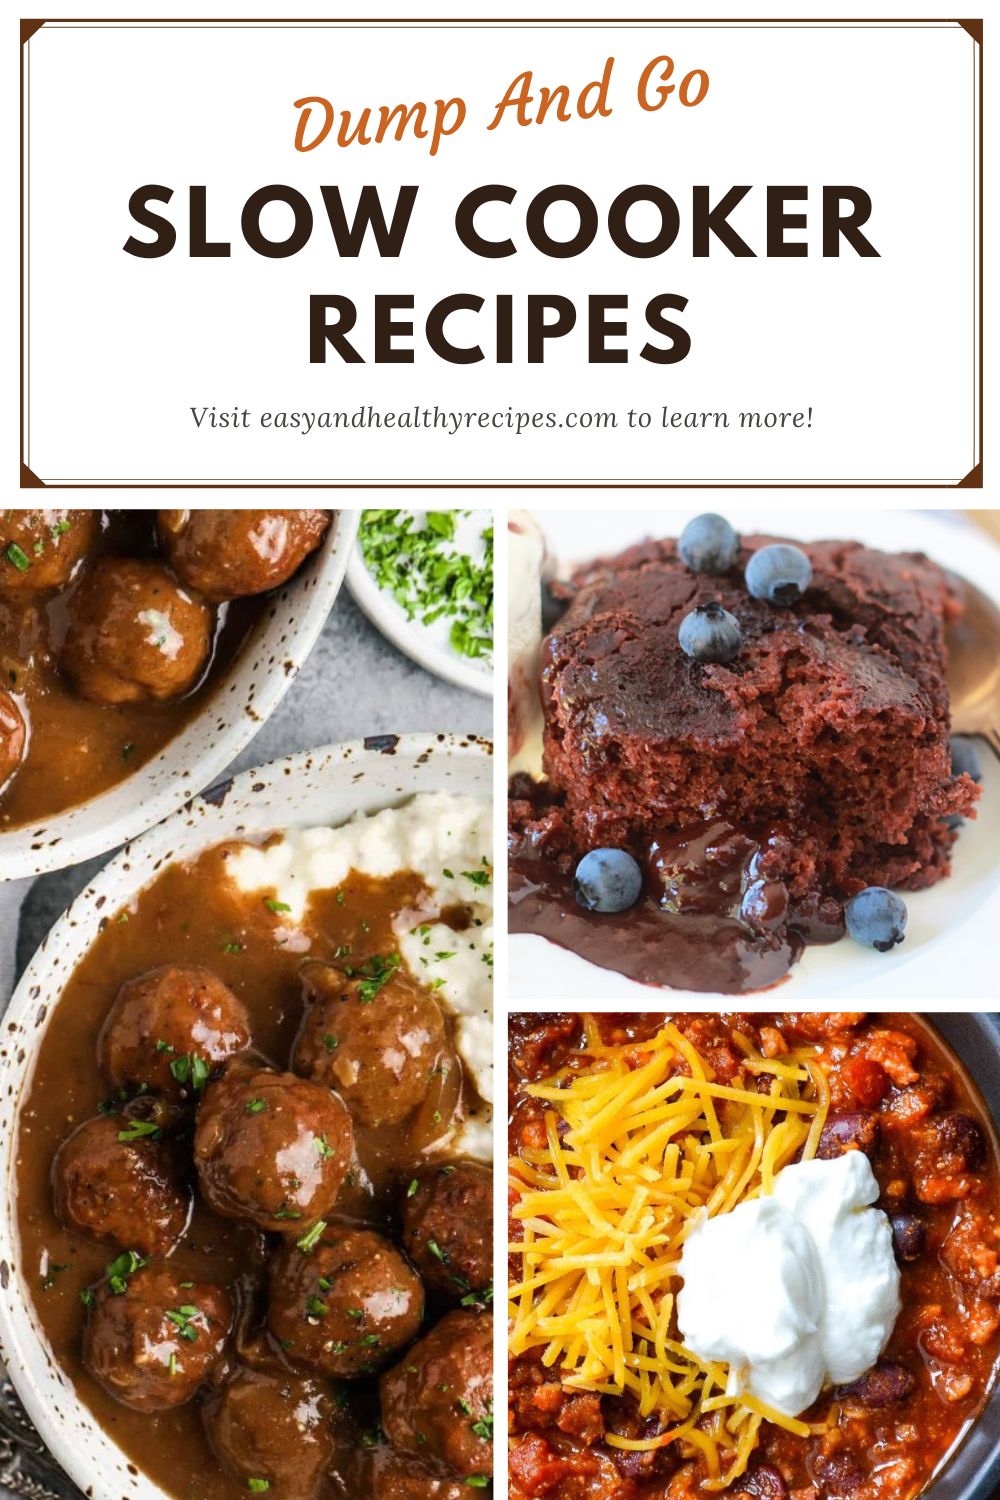 Dump And Go Slow Cooker Recipes To Make This Season Easy And Healthy Recipes